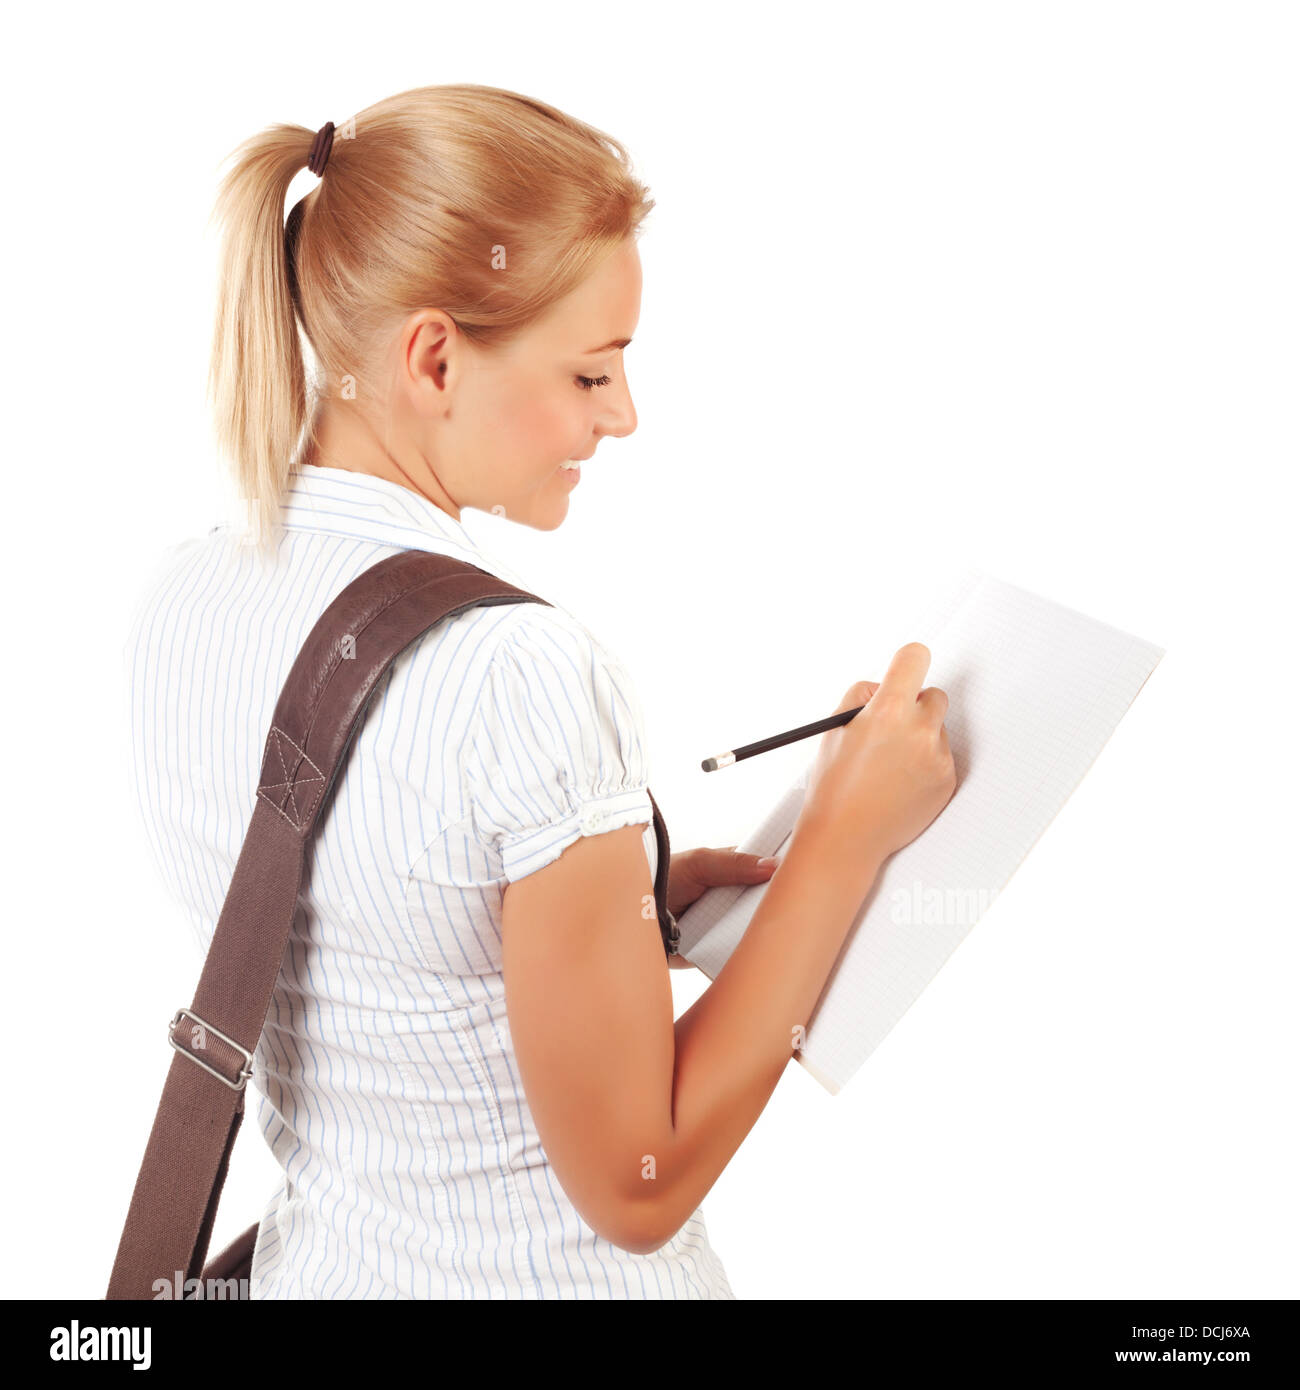 Student girl pass exams, isolated on white background, go to university, writing test, smart schoolgirl, education concept Stock Photo